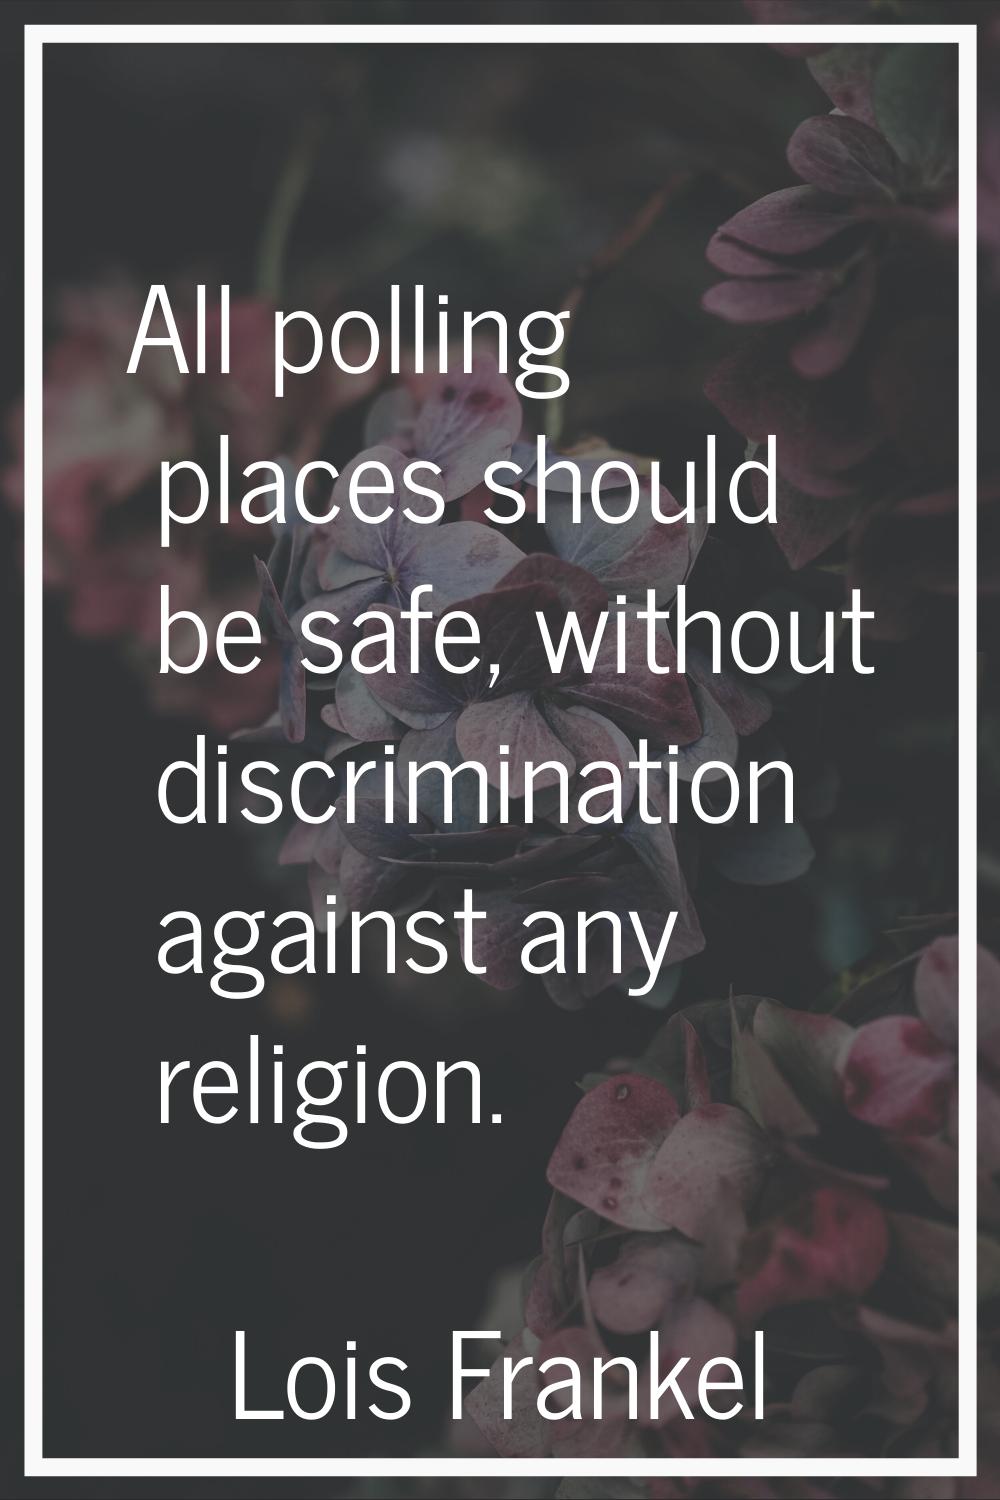 All polling places should be safe, without discrimination against any religion.